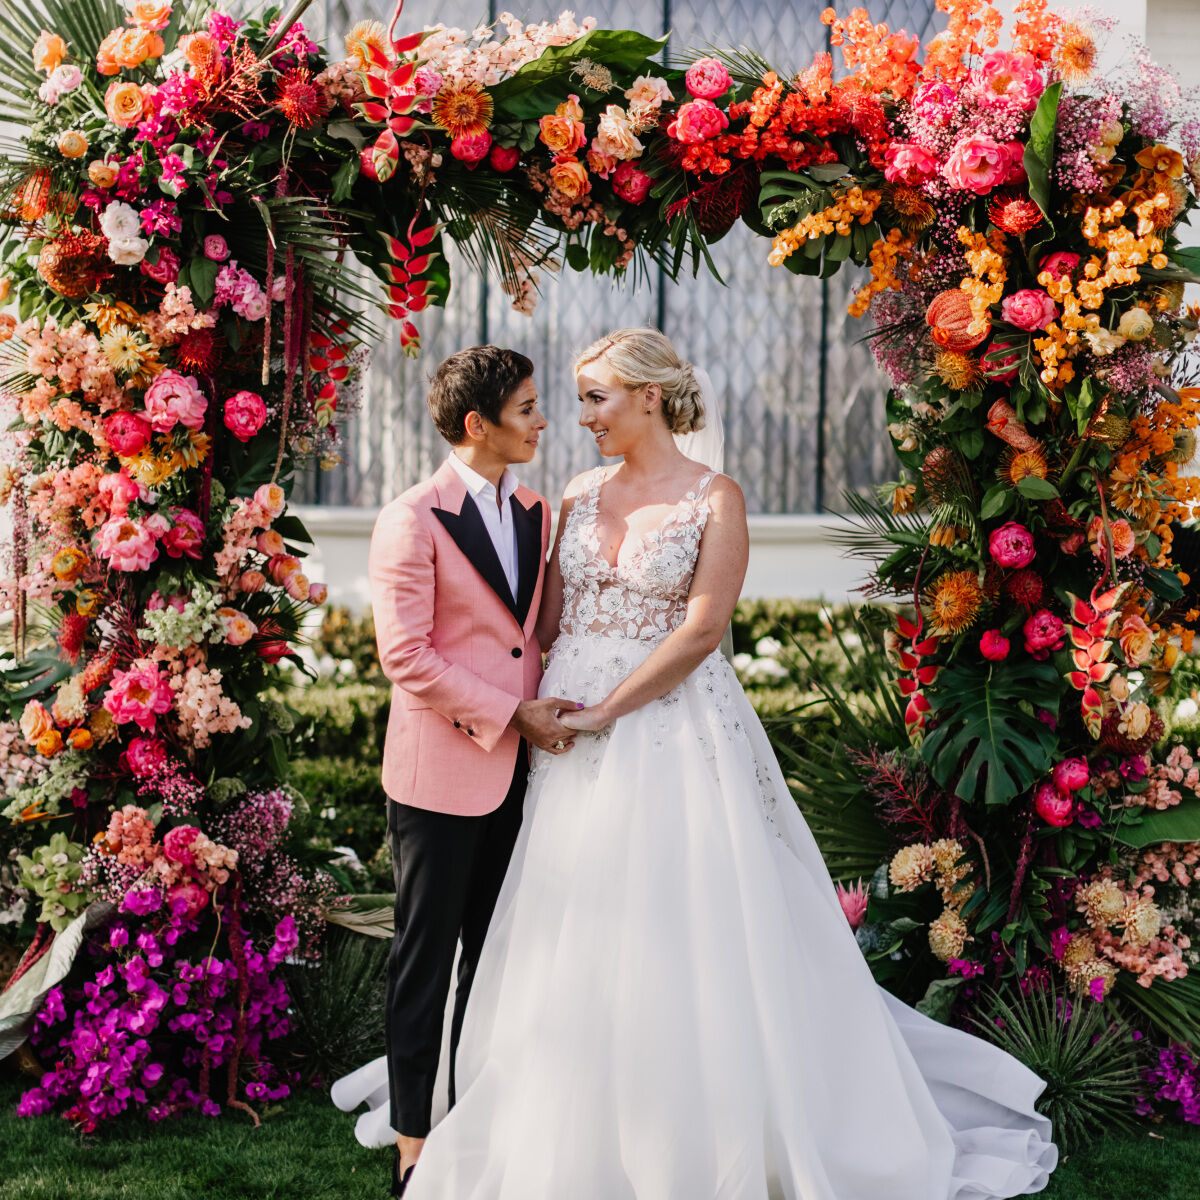 Colorful Wedding: Wedding couple posing beneath a lush ceremony arch of pink and orange blooms at their outdoor wedding ceremony.